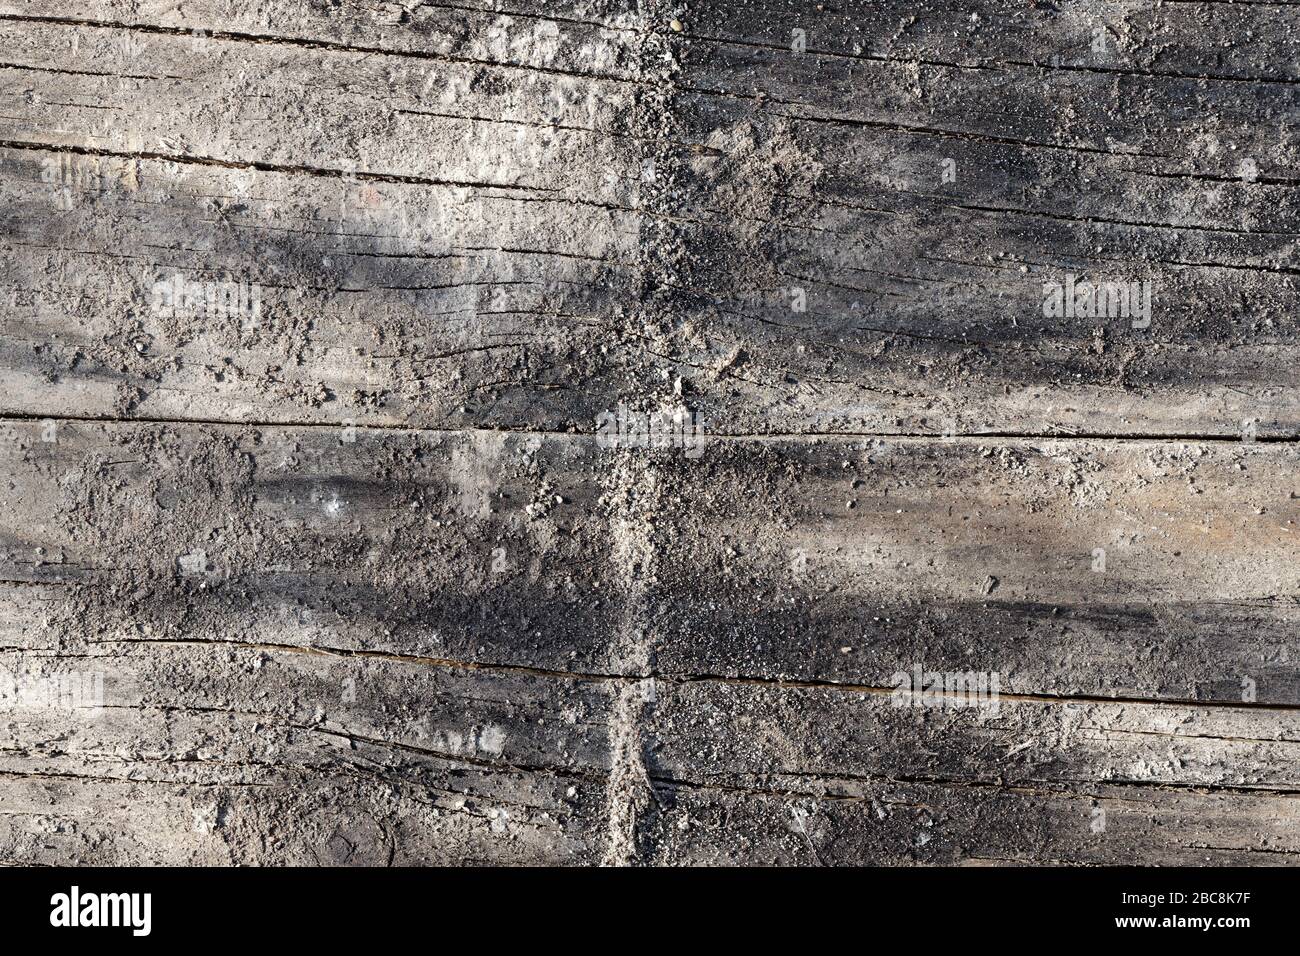 Weathered Construction Timber Wooden Slats Background with Quartz Sand and Cement Stock Photo